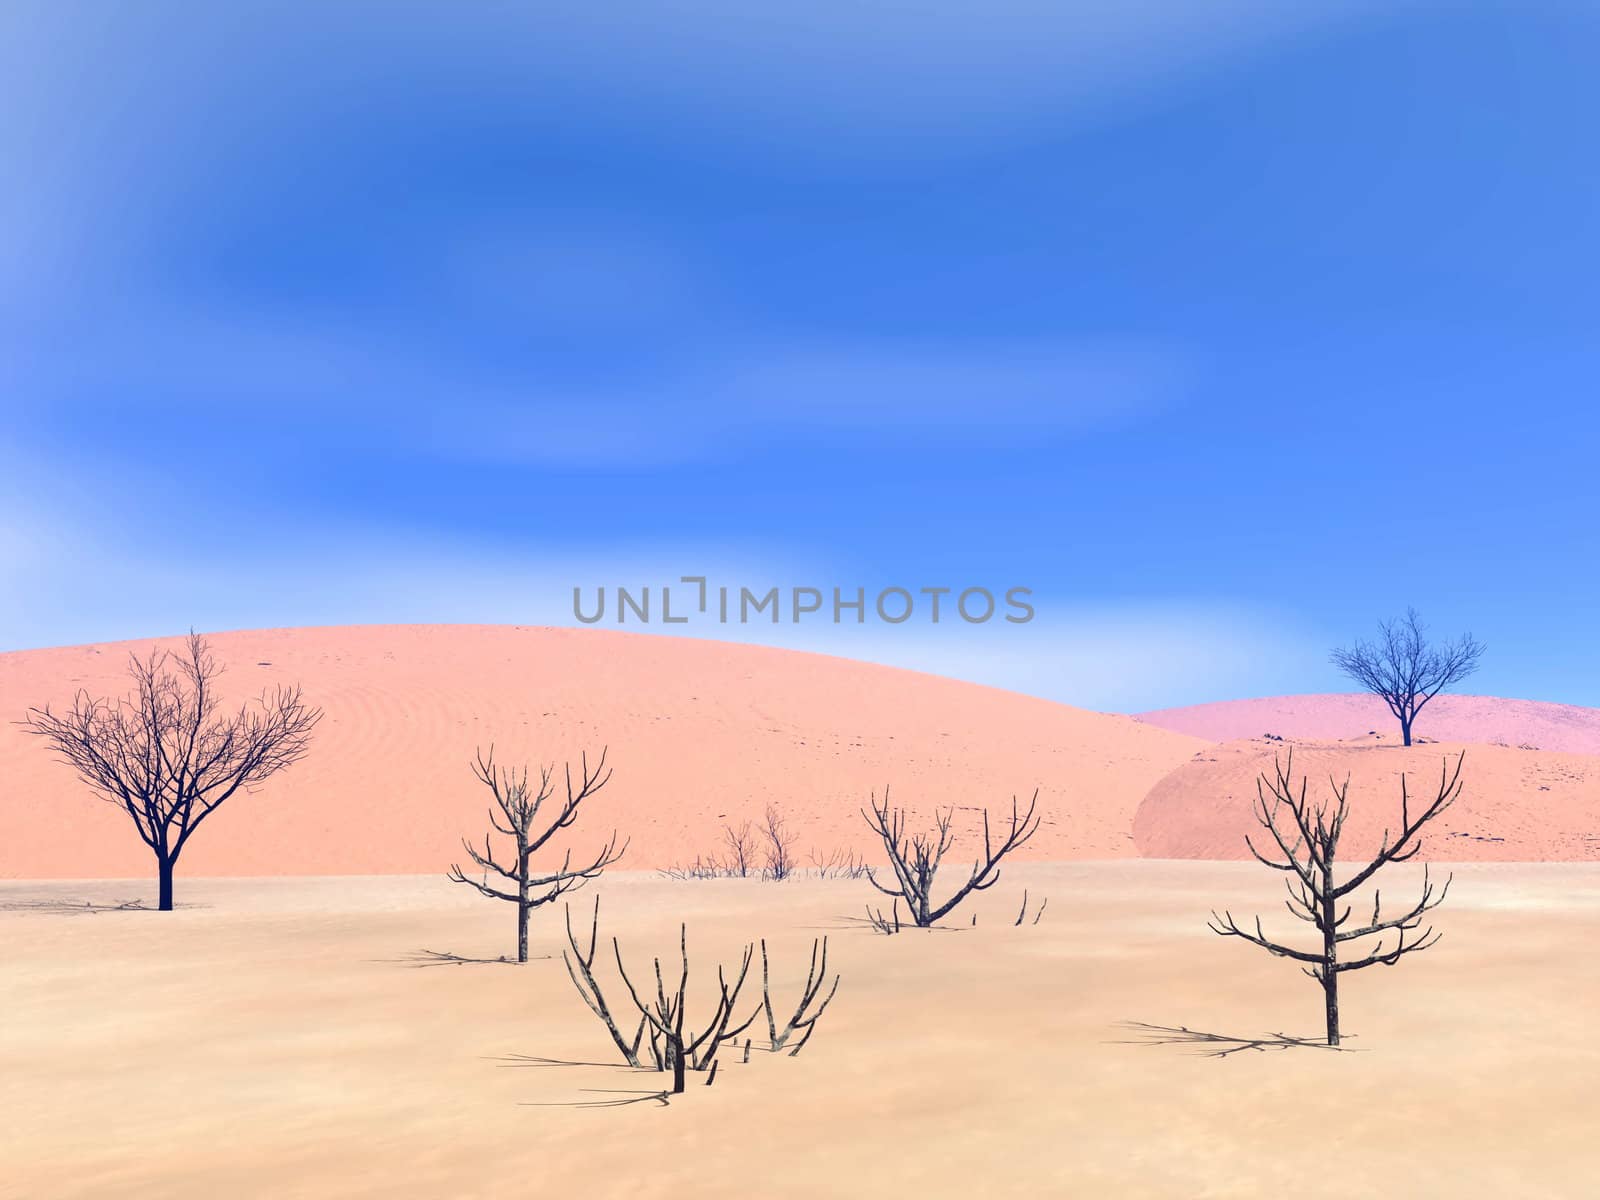 Dead trees in a sand desert by hot day